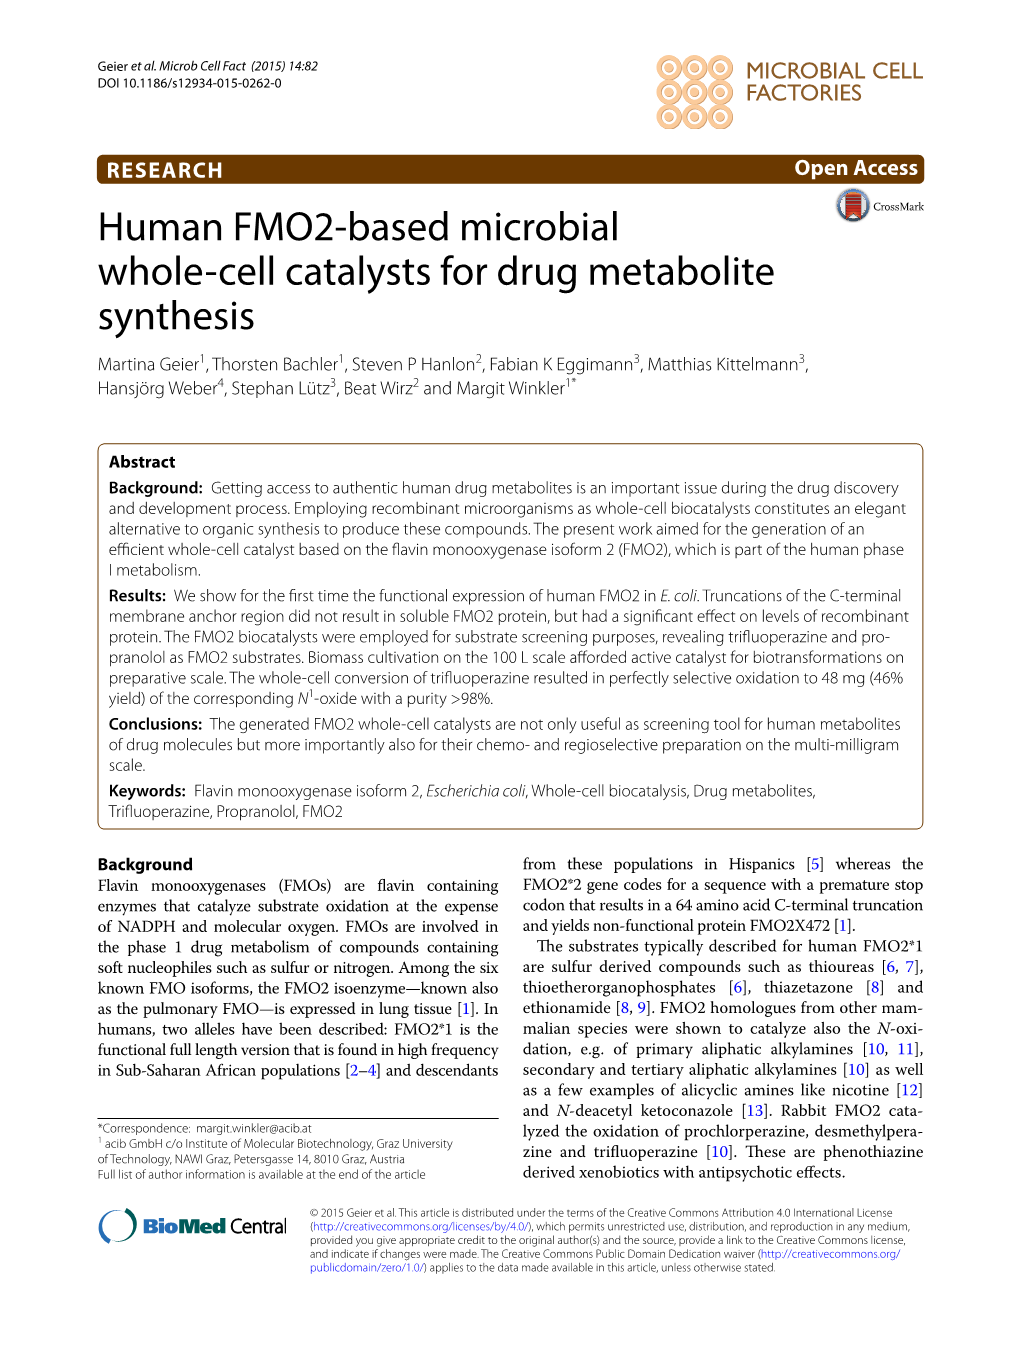 Human FMO2-Based Microbial Whole-Cell Catalysts for Drug